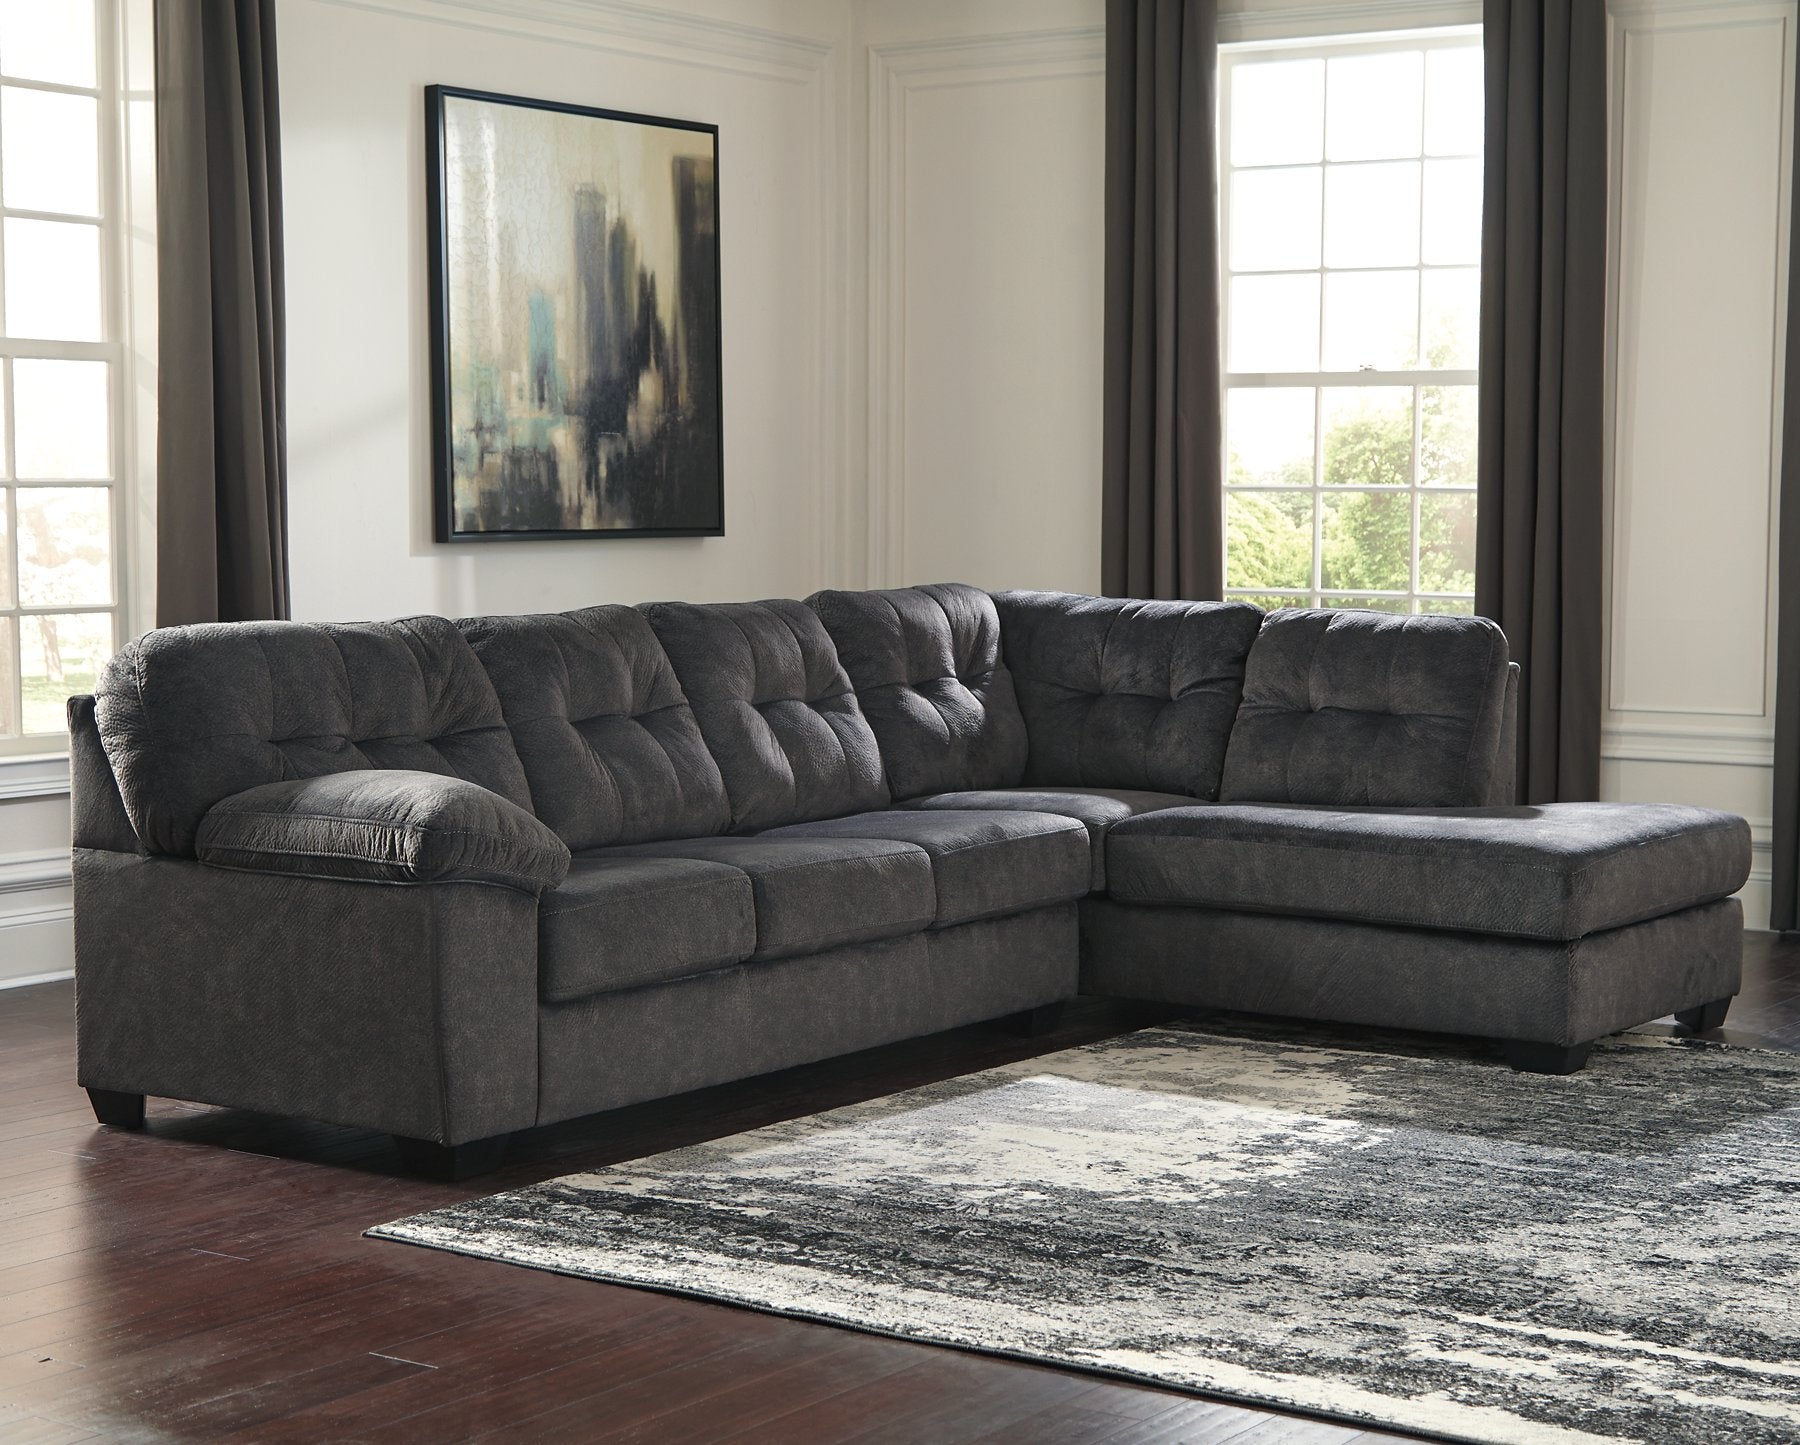 Accrington 2-Piece Sleeper Sectional with Chaise Accrington 2-Piece Sleeper Sectional with Chaise Half Price Furniture